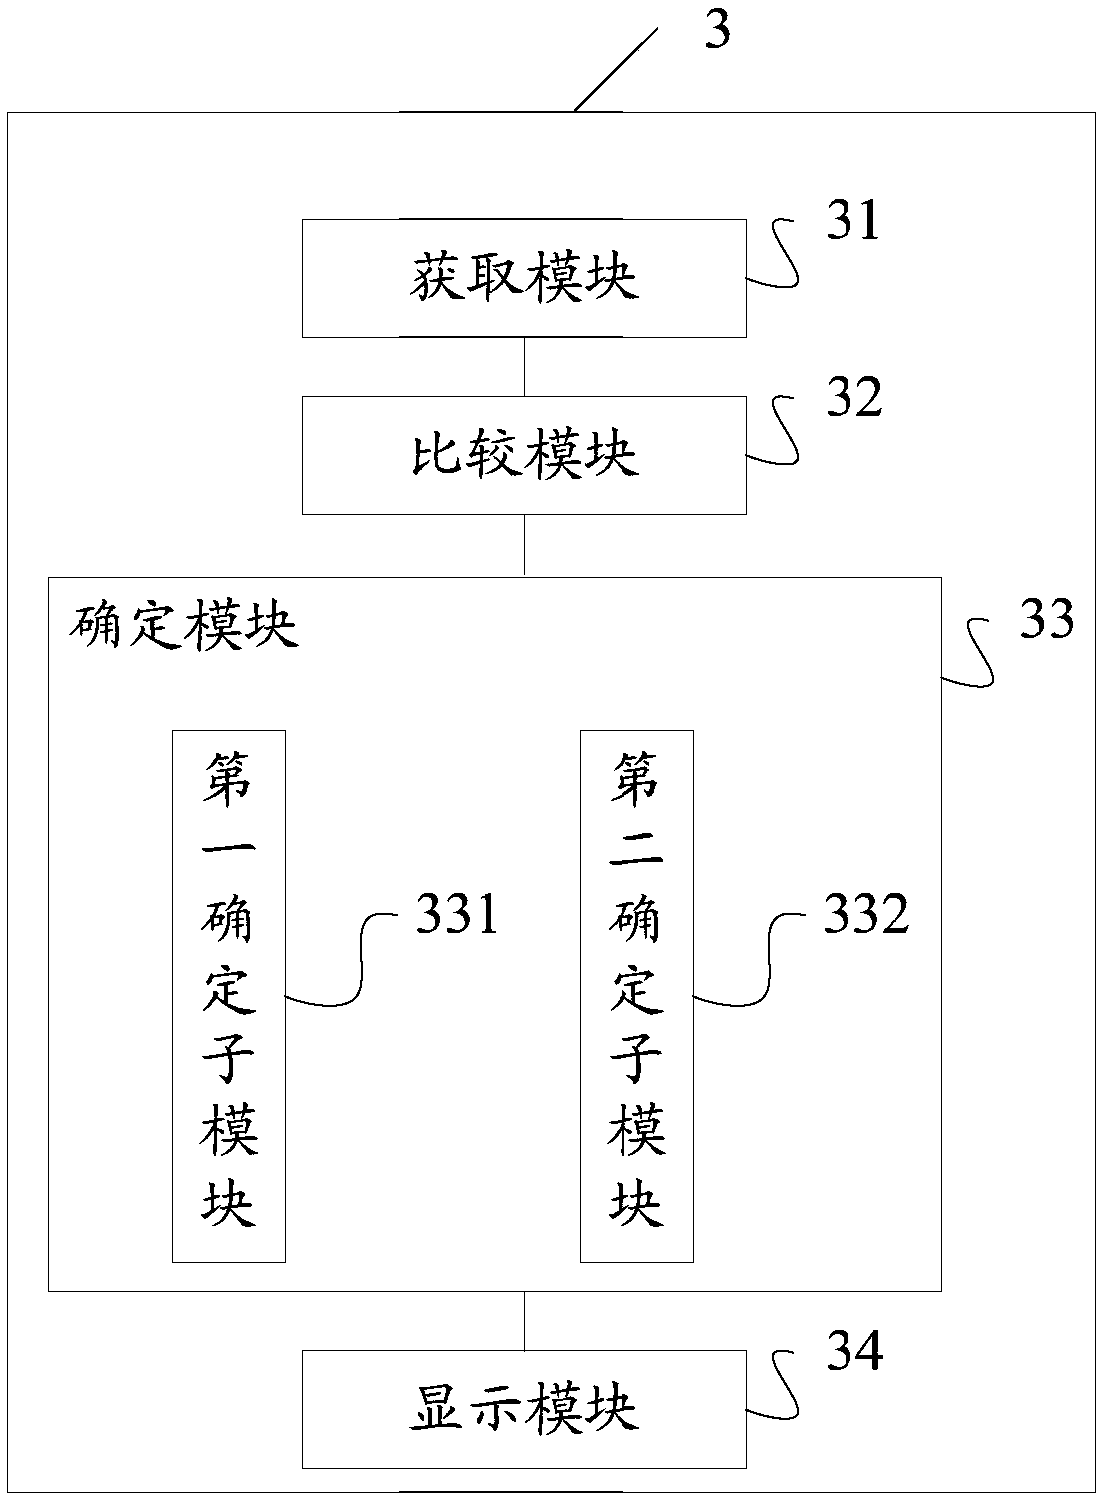 Automatic detection method and device of SDI chip, storage medium and terminal